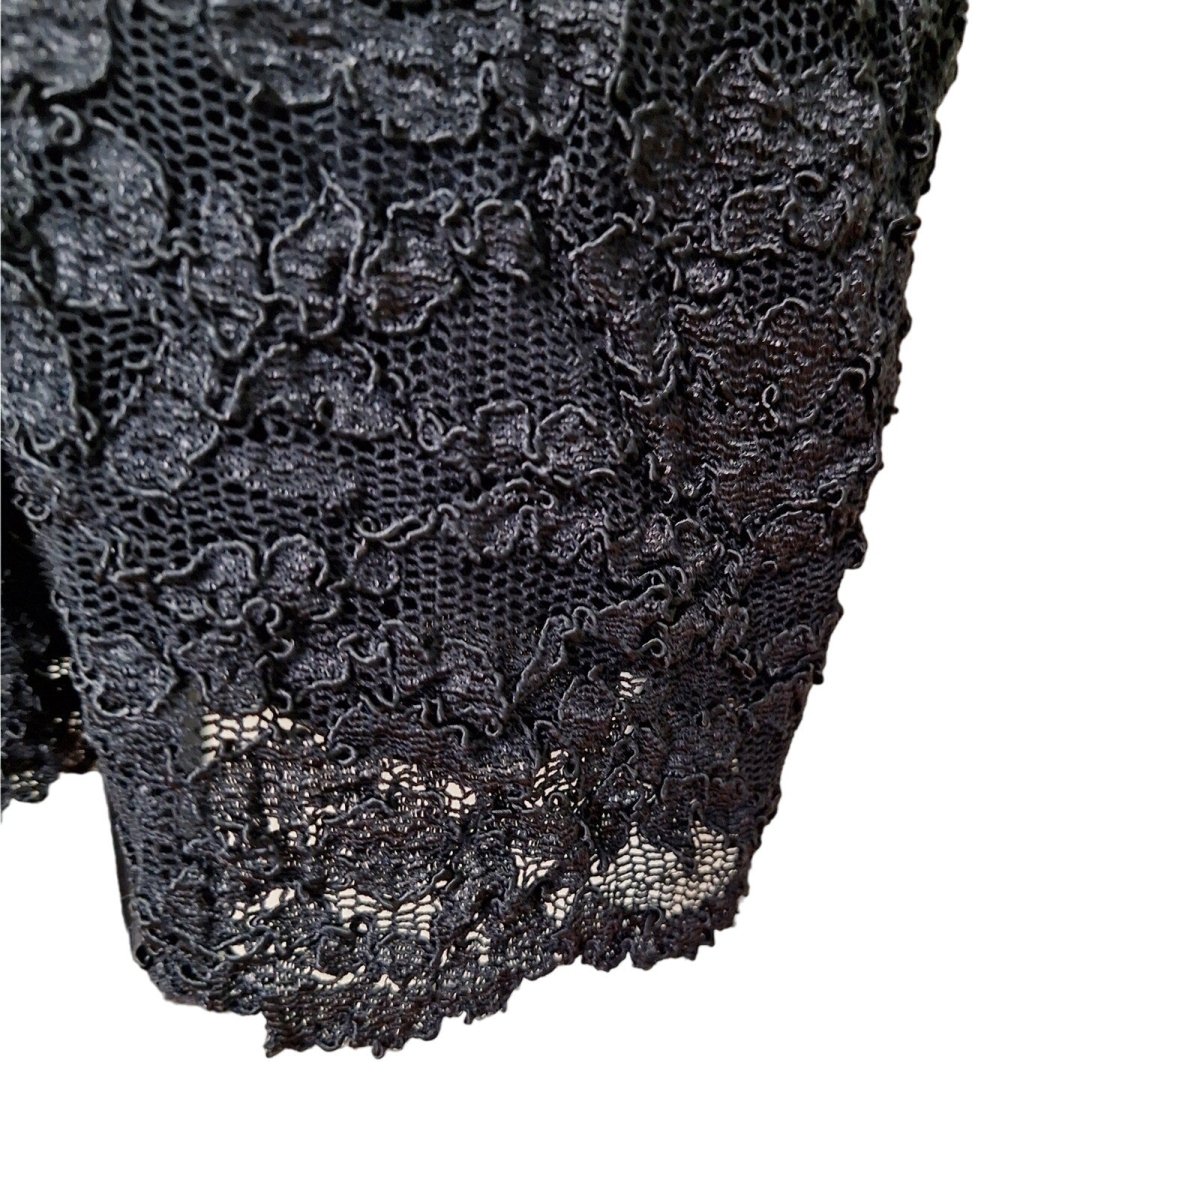 Vintage 80s/90s Black Lace Mini Dress Women Size XS to Small - themallvintage The Mall Vintage 1980s 1990s Dresses